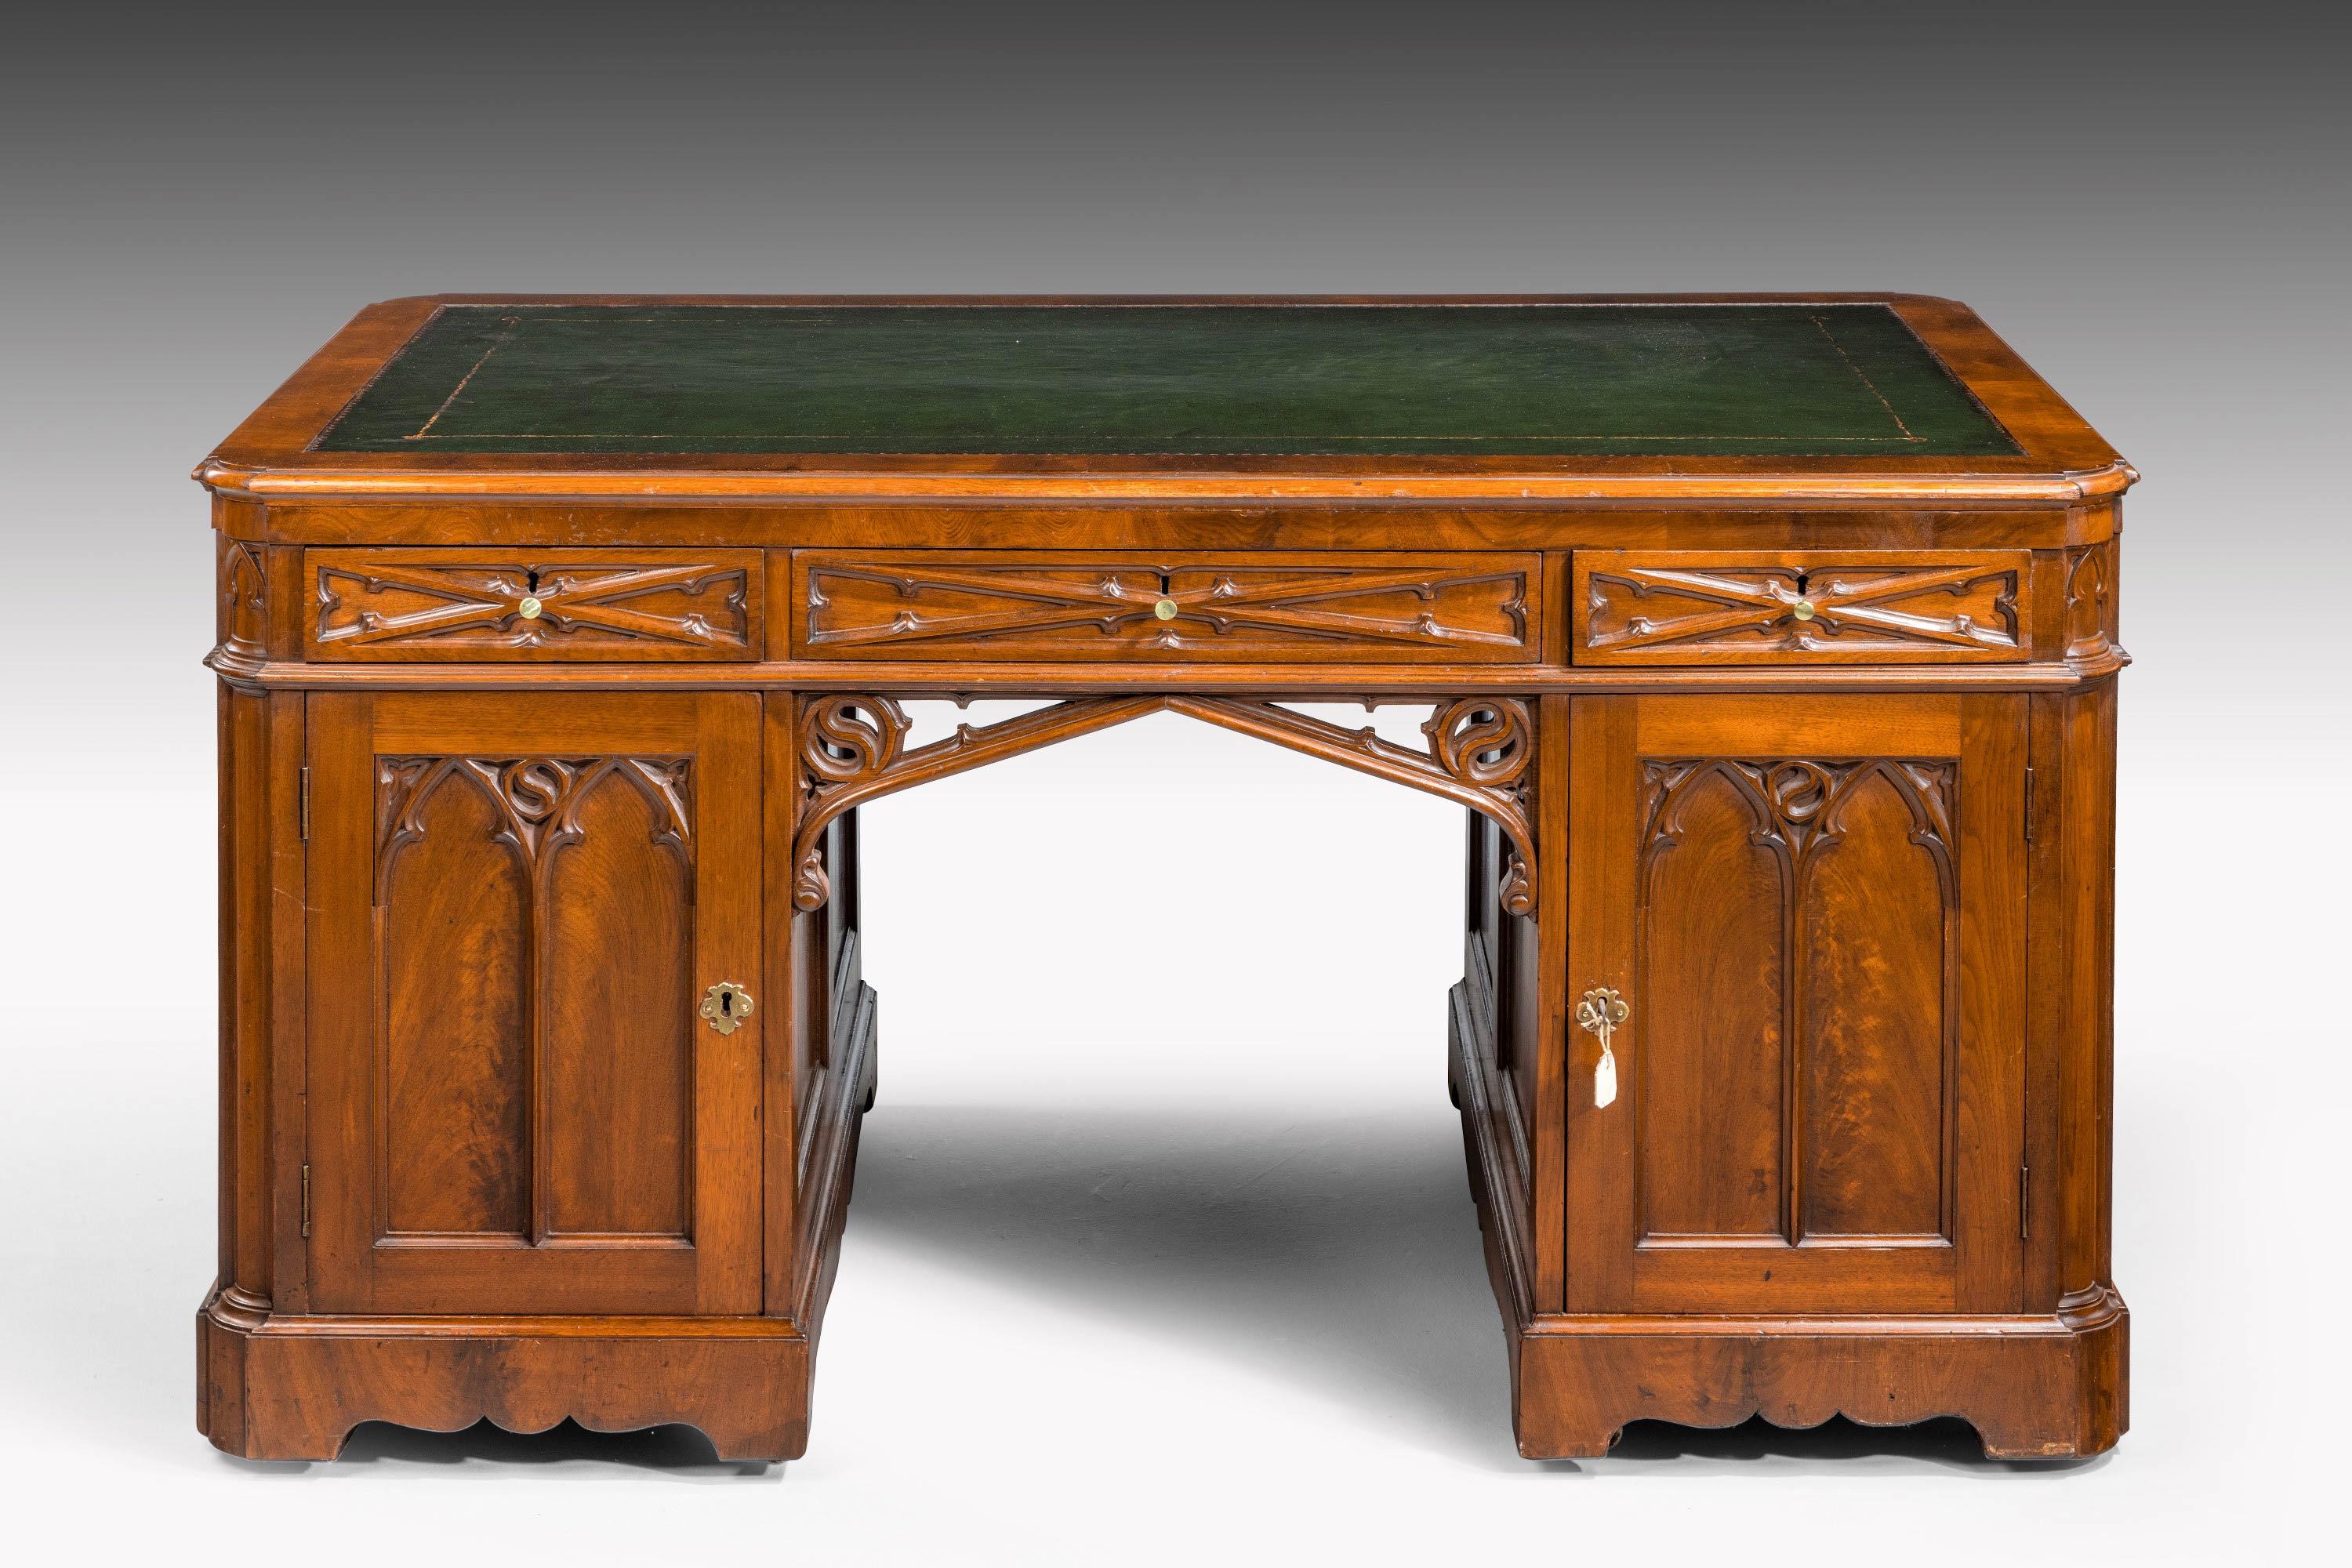 A very fine quality and well-carved, Gothic, mahogany desk. With elaborate and well-executed carving to all the show surfaces. Draws to one side with reverse cupboards and drawers to the other.
 